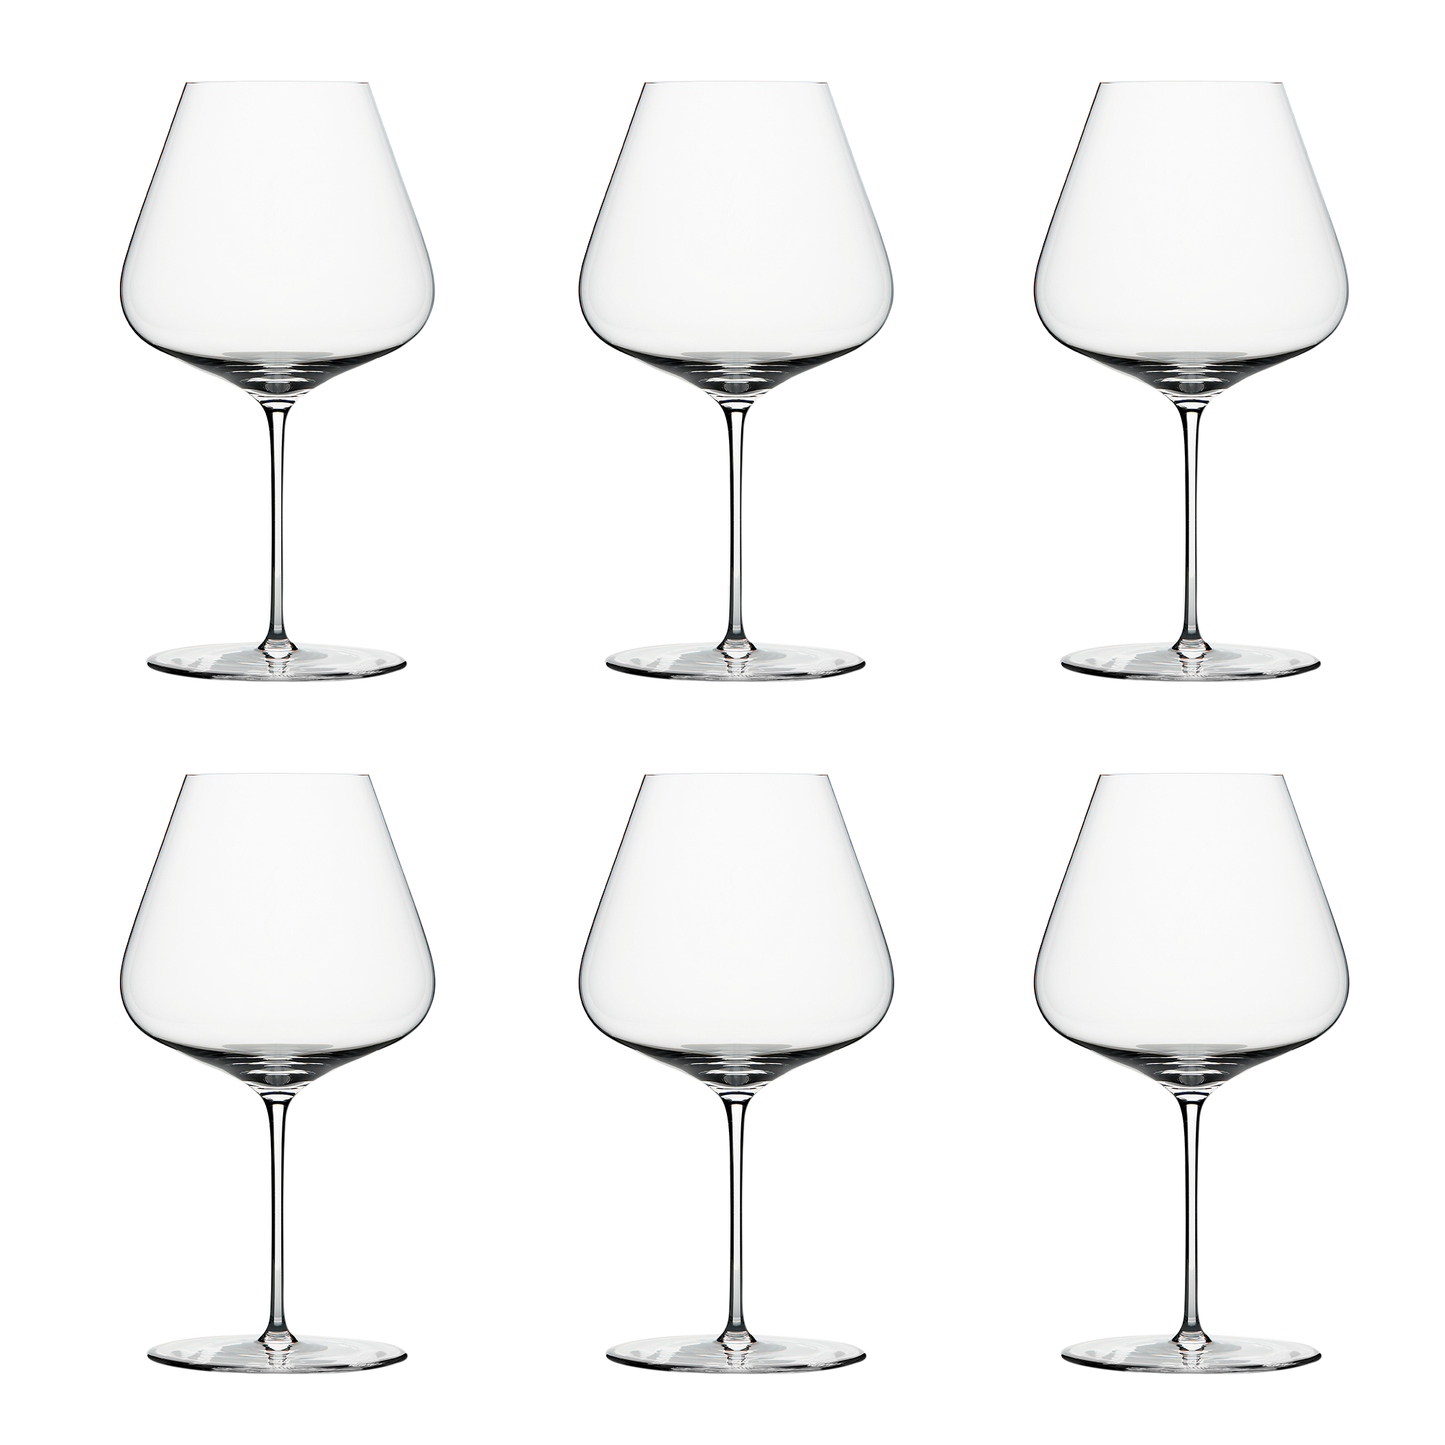 Zalto Universal Denk'art Wine Glasses 2 Pack DISPLAYED ONLY NEVER